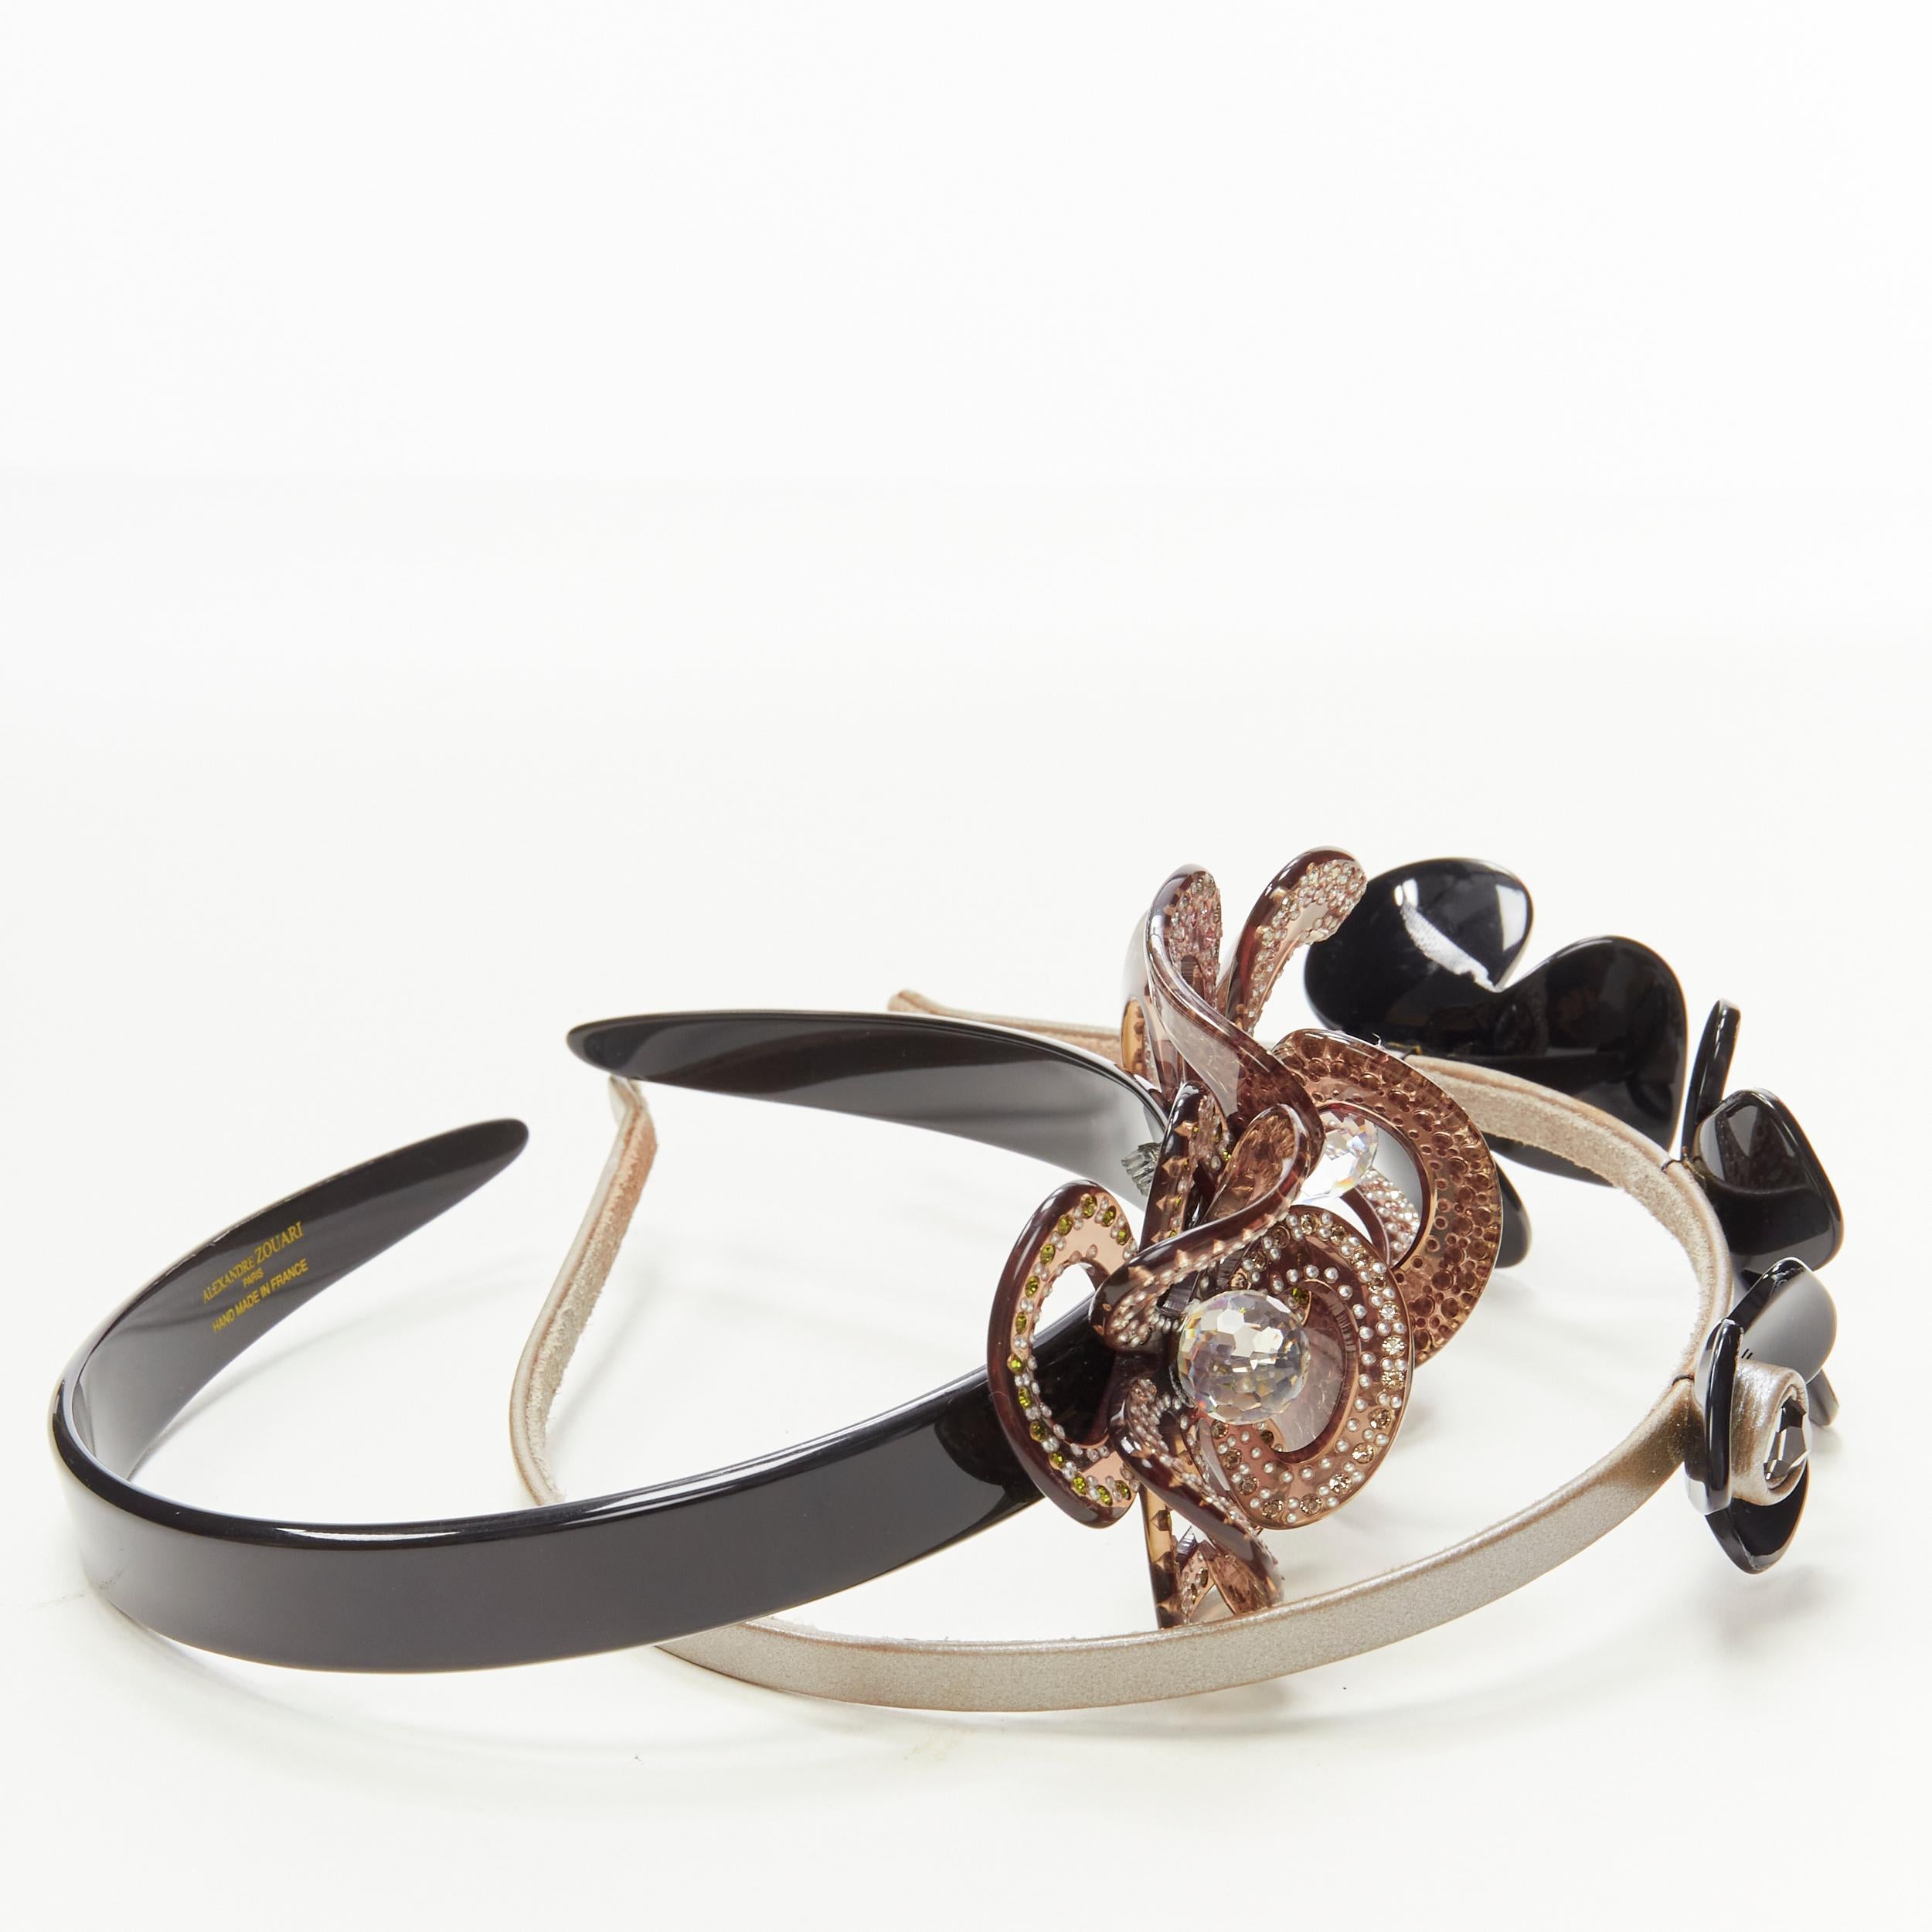 ALEXANDRE ZOUARI black grey crystal 3D layered flower acrylic headband X2
Reference: ANWU/A00213
Brand: Alexandre Zouari
Designer: Alexandre Zouari
Material: Acrylic, Leather
Color: Black, Grey
Closure: Pull On
Made in: France

CONDITION:
Condition: